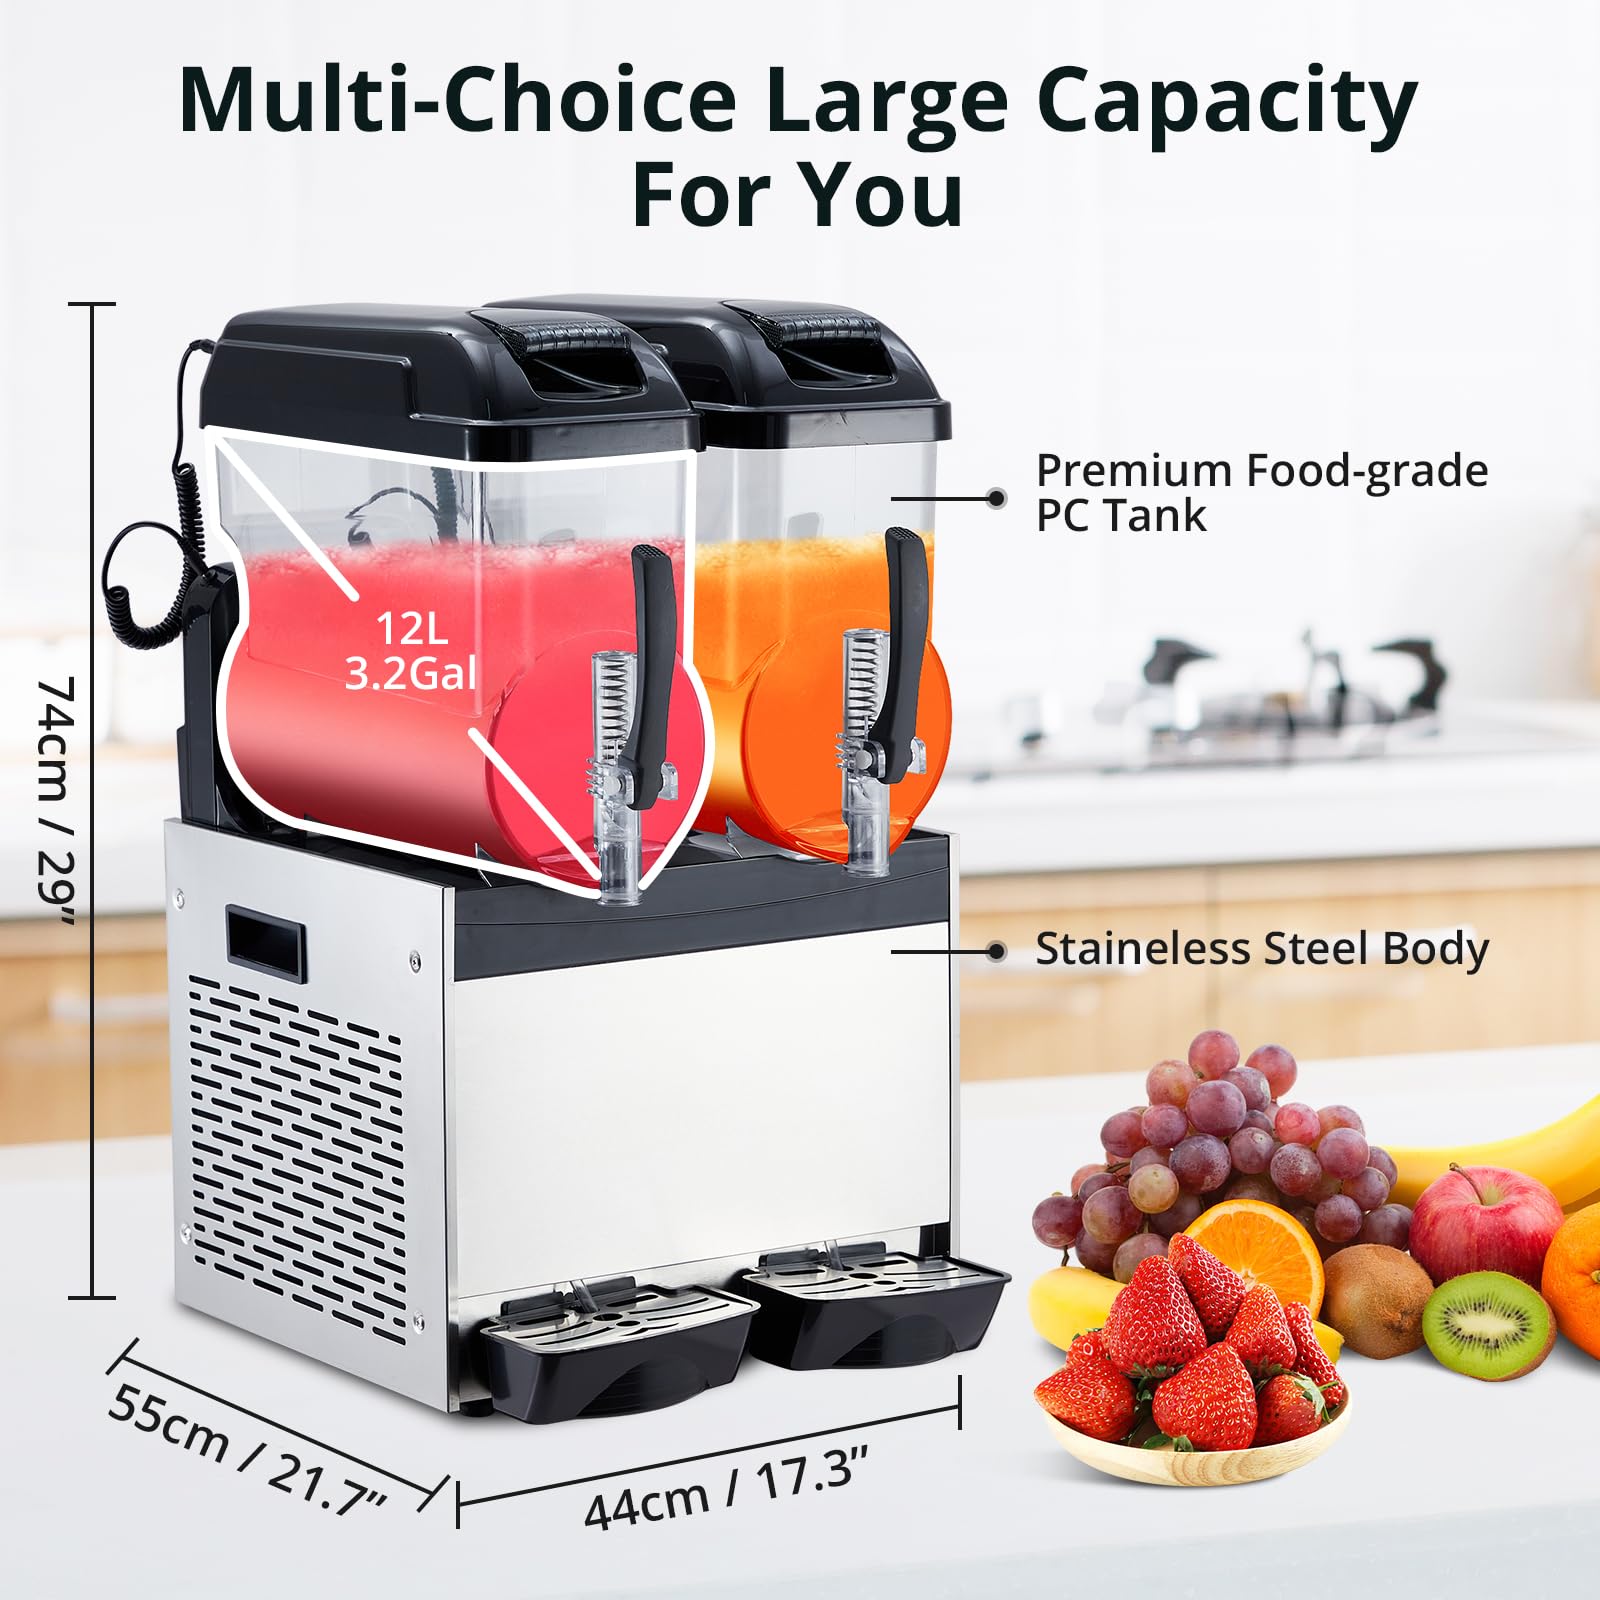 GARVEE 24L Commercial Slushy Machine, 700W, Self-Cleaning, Stainless Steel for Margaritas, Snow Melts, Cocktails, Homes, Coffee Shops, Restaurants